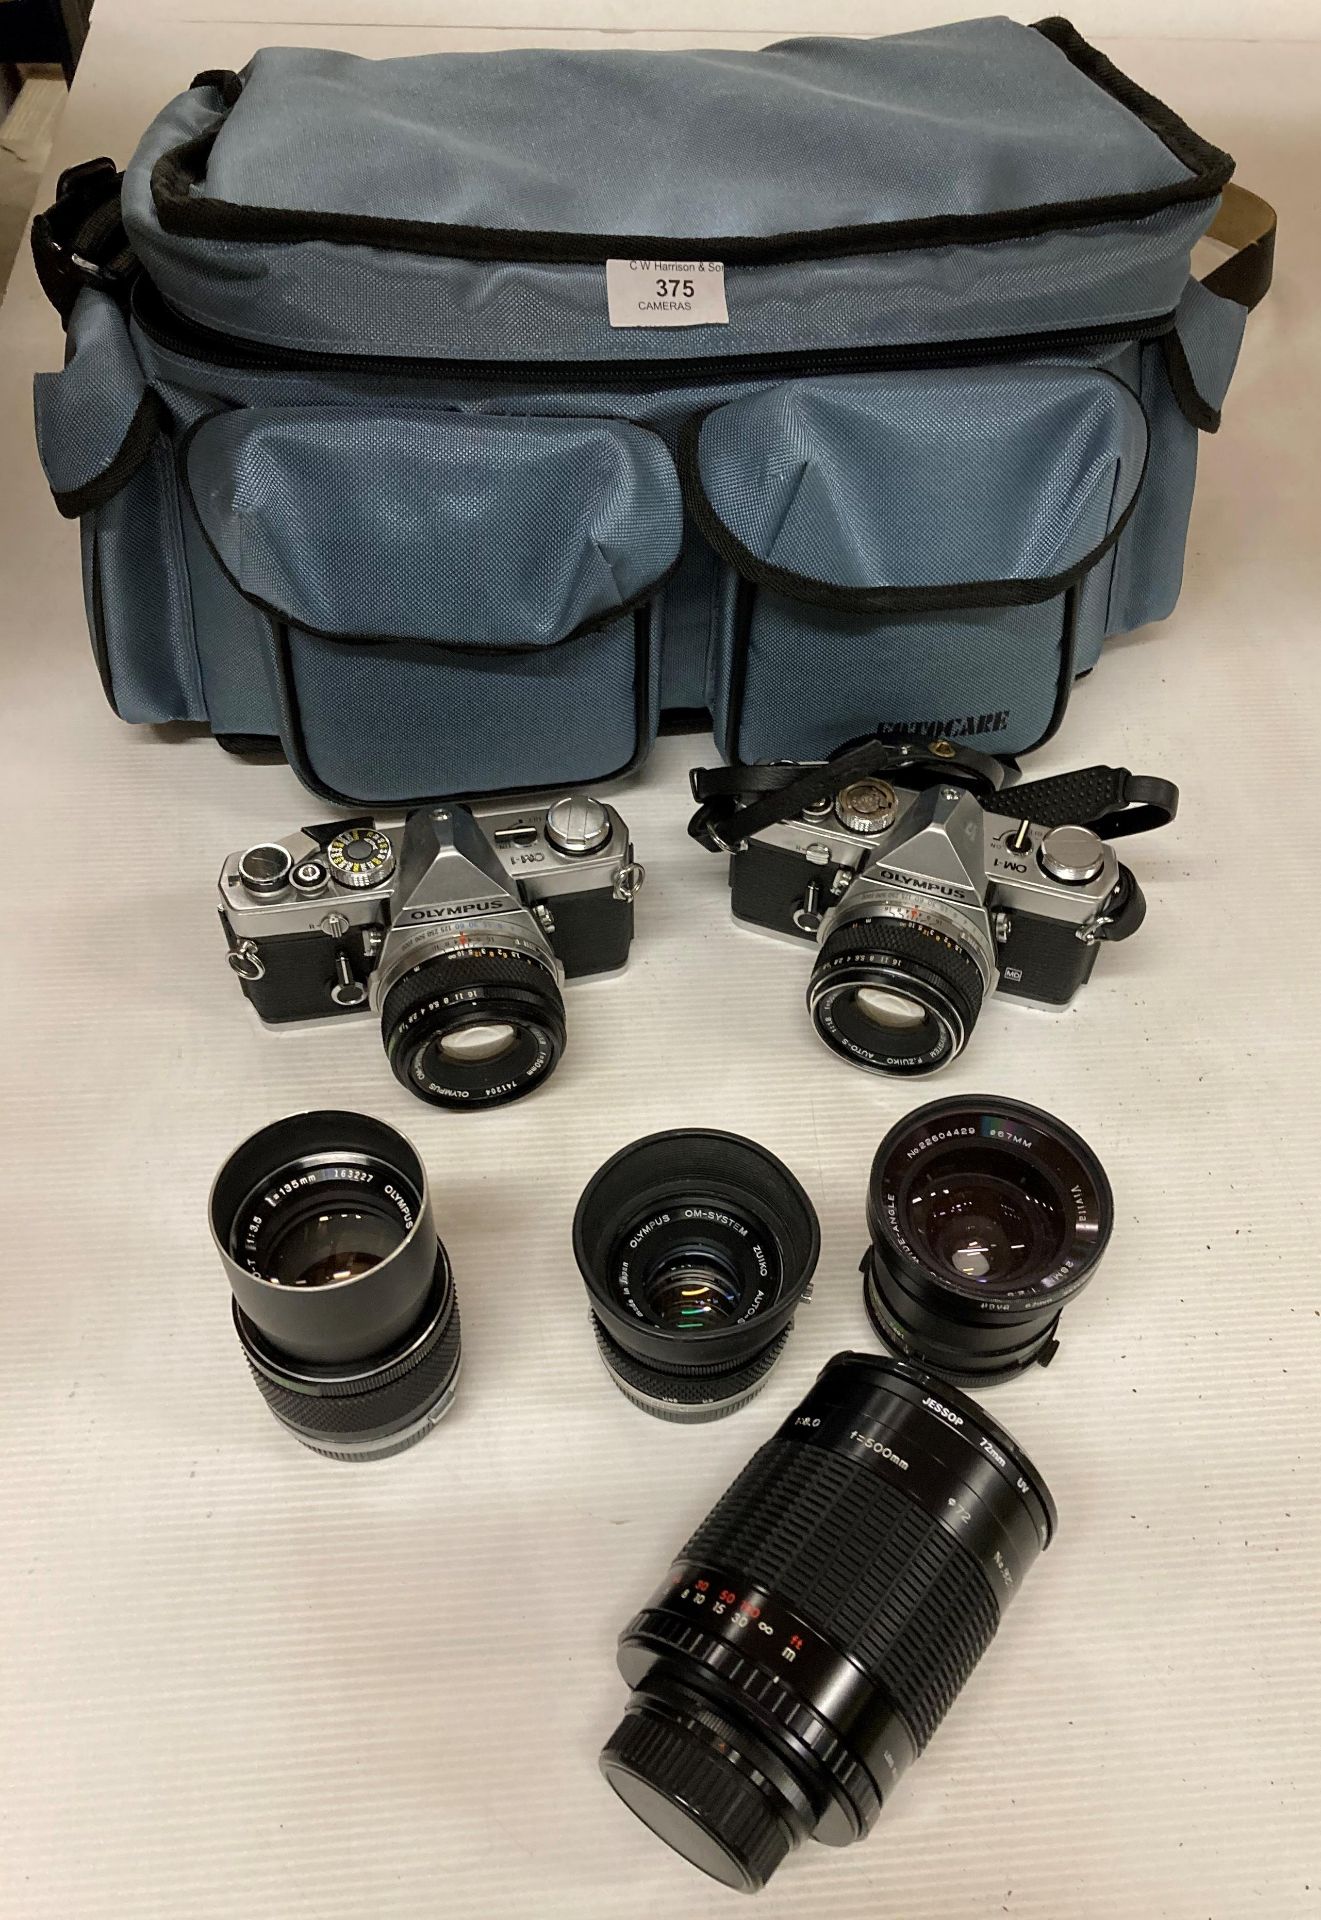 2 x Olympus OM1 cameras and 4 x assorted lens in blue carry case (R13)